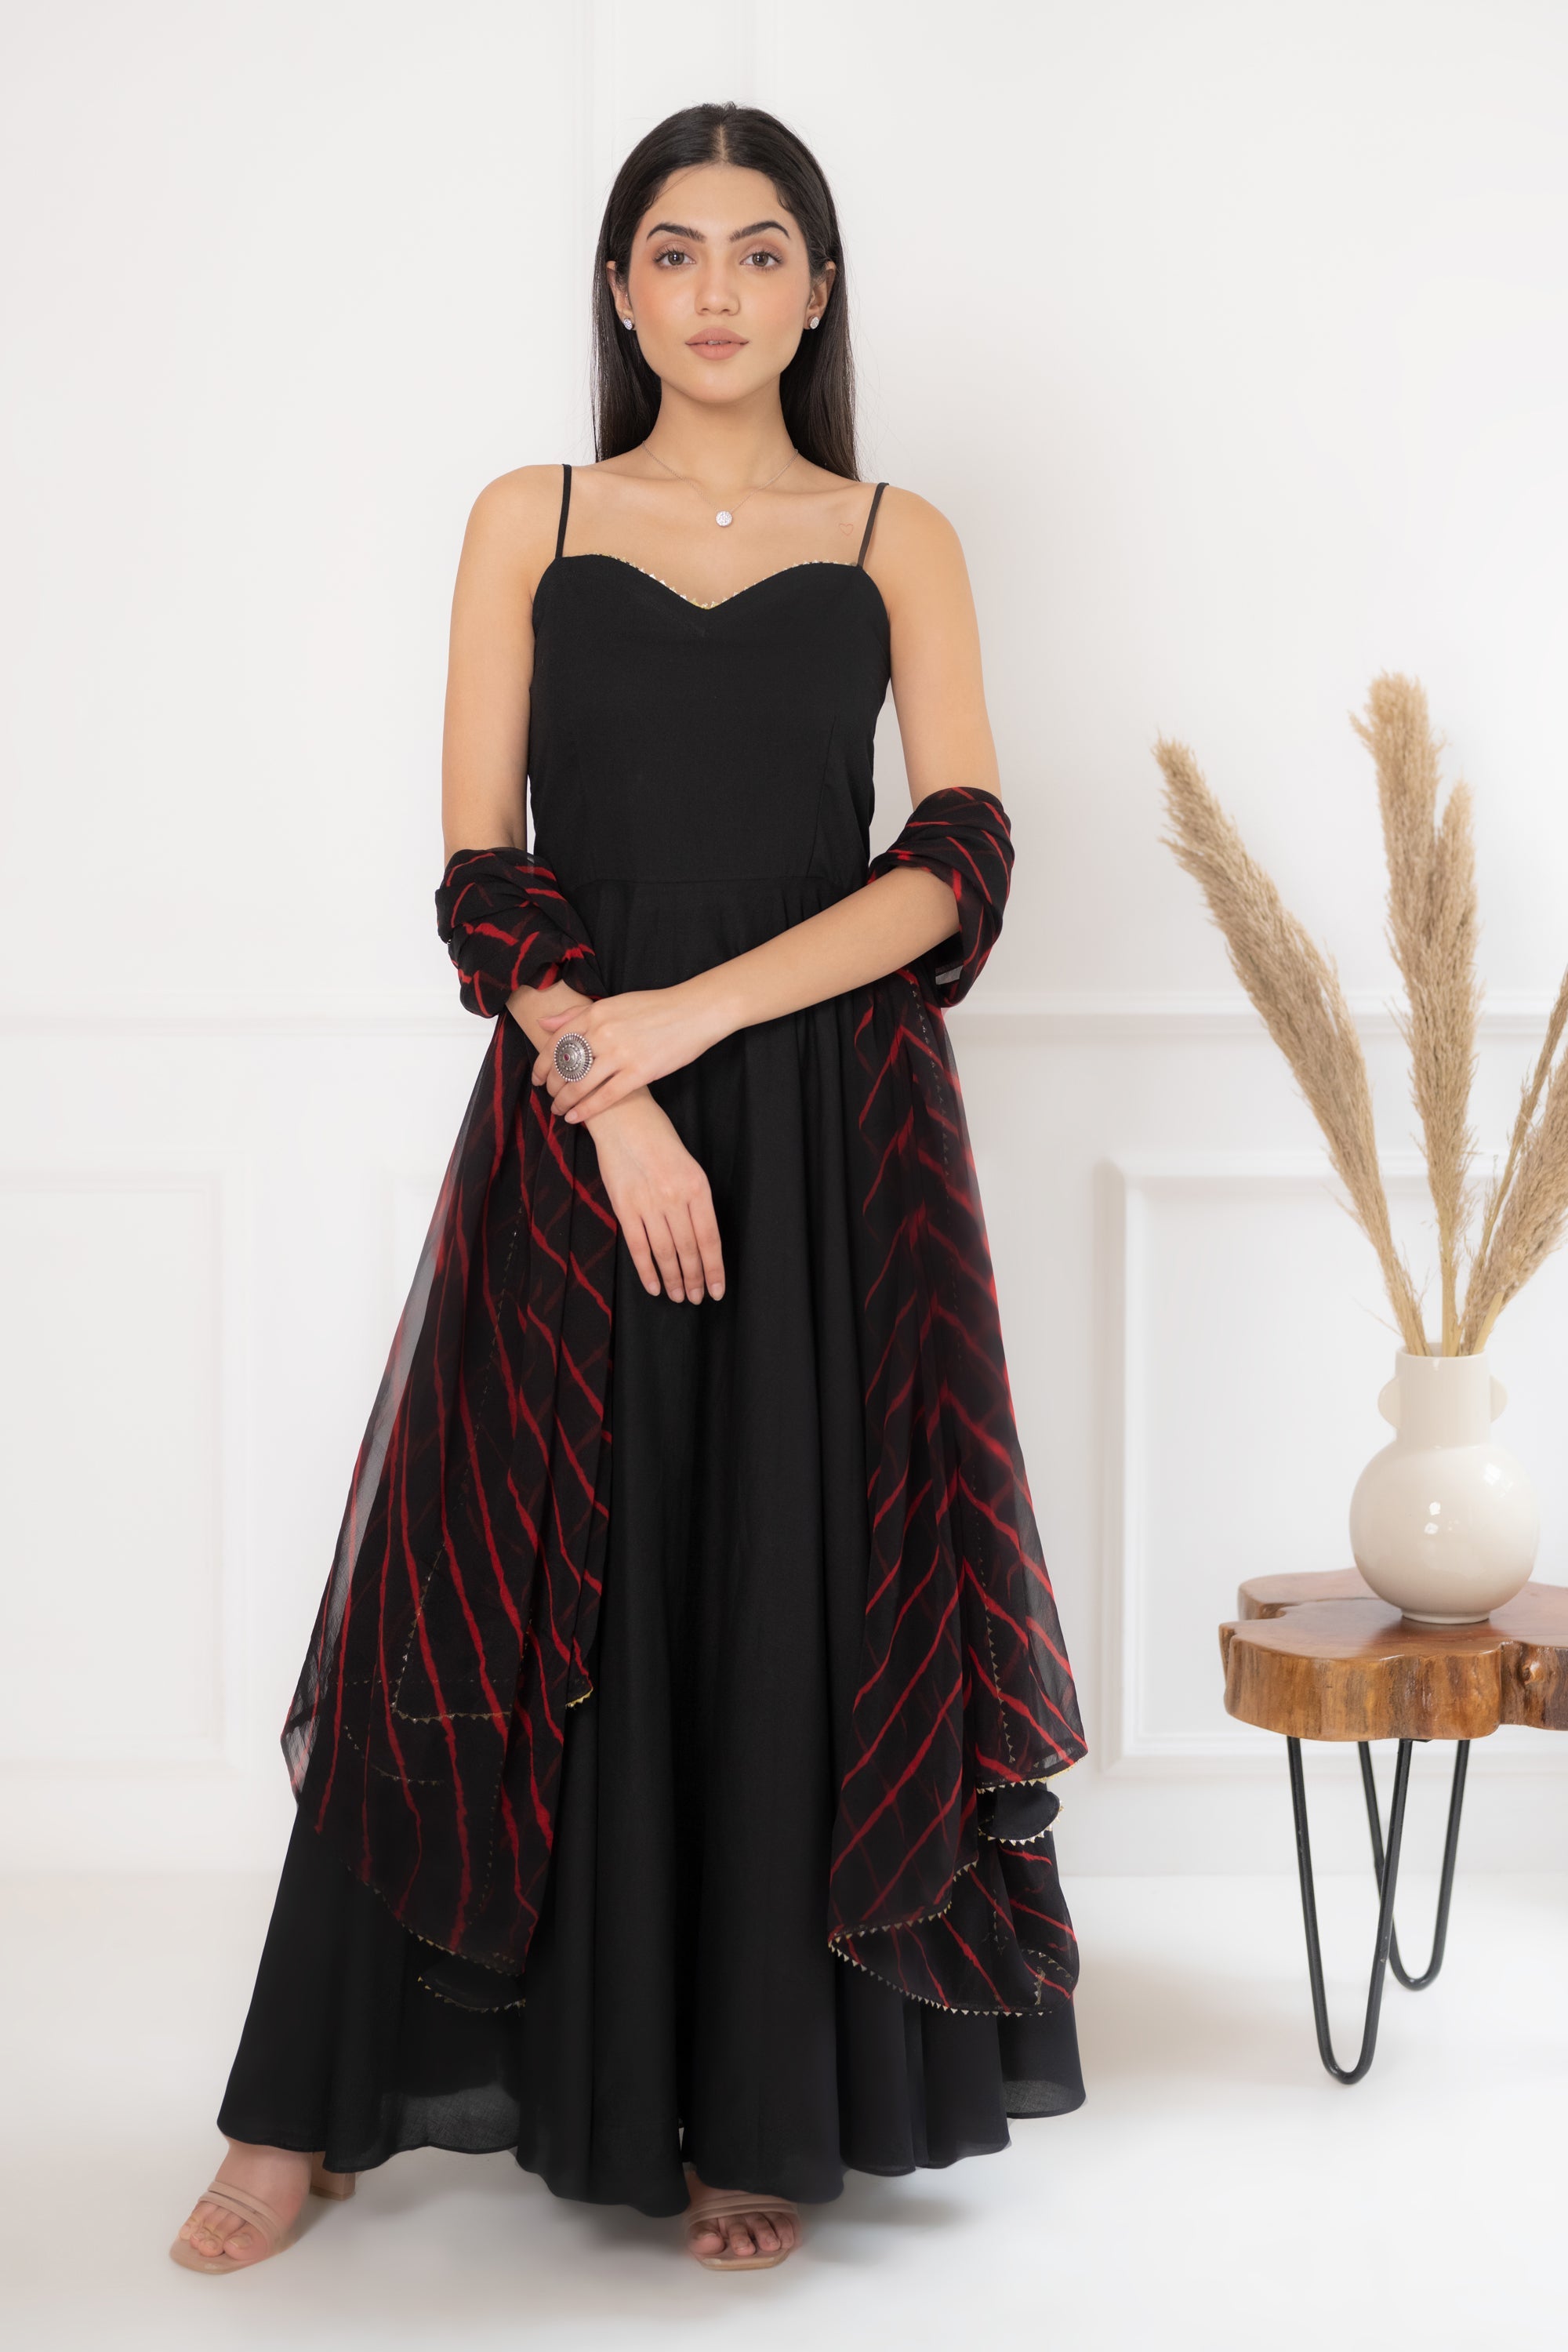 Ethnic Gowns | Black Gown With Red Banarsi Dupatta | Freeup